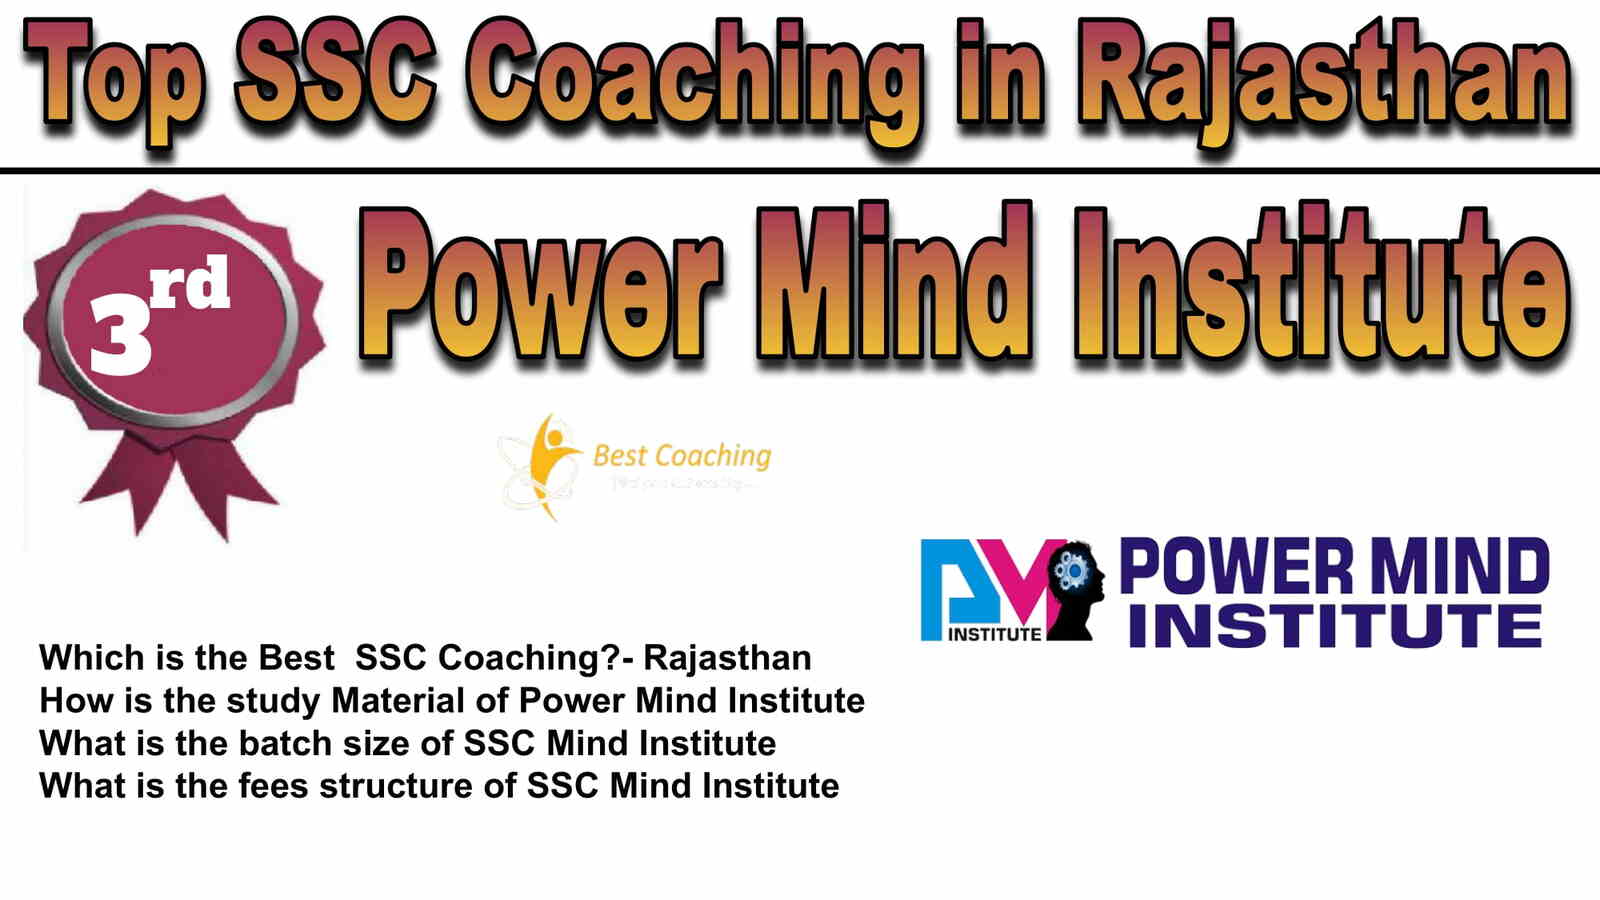 Rank 3 Best SSC Coaching in Rajasthan